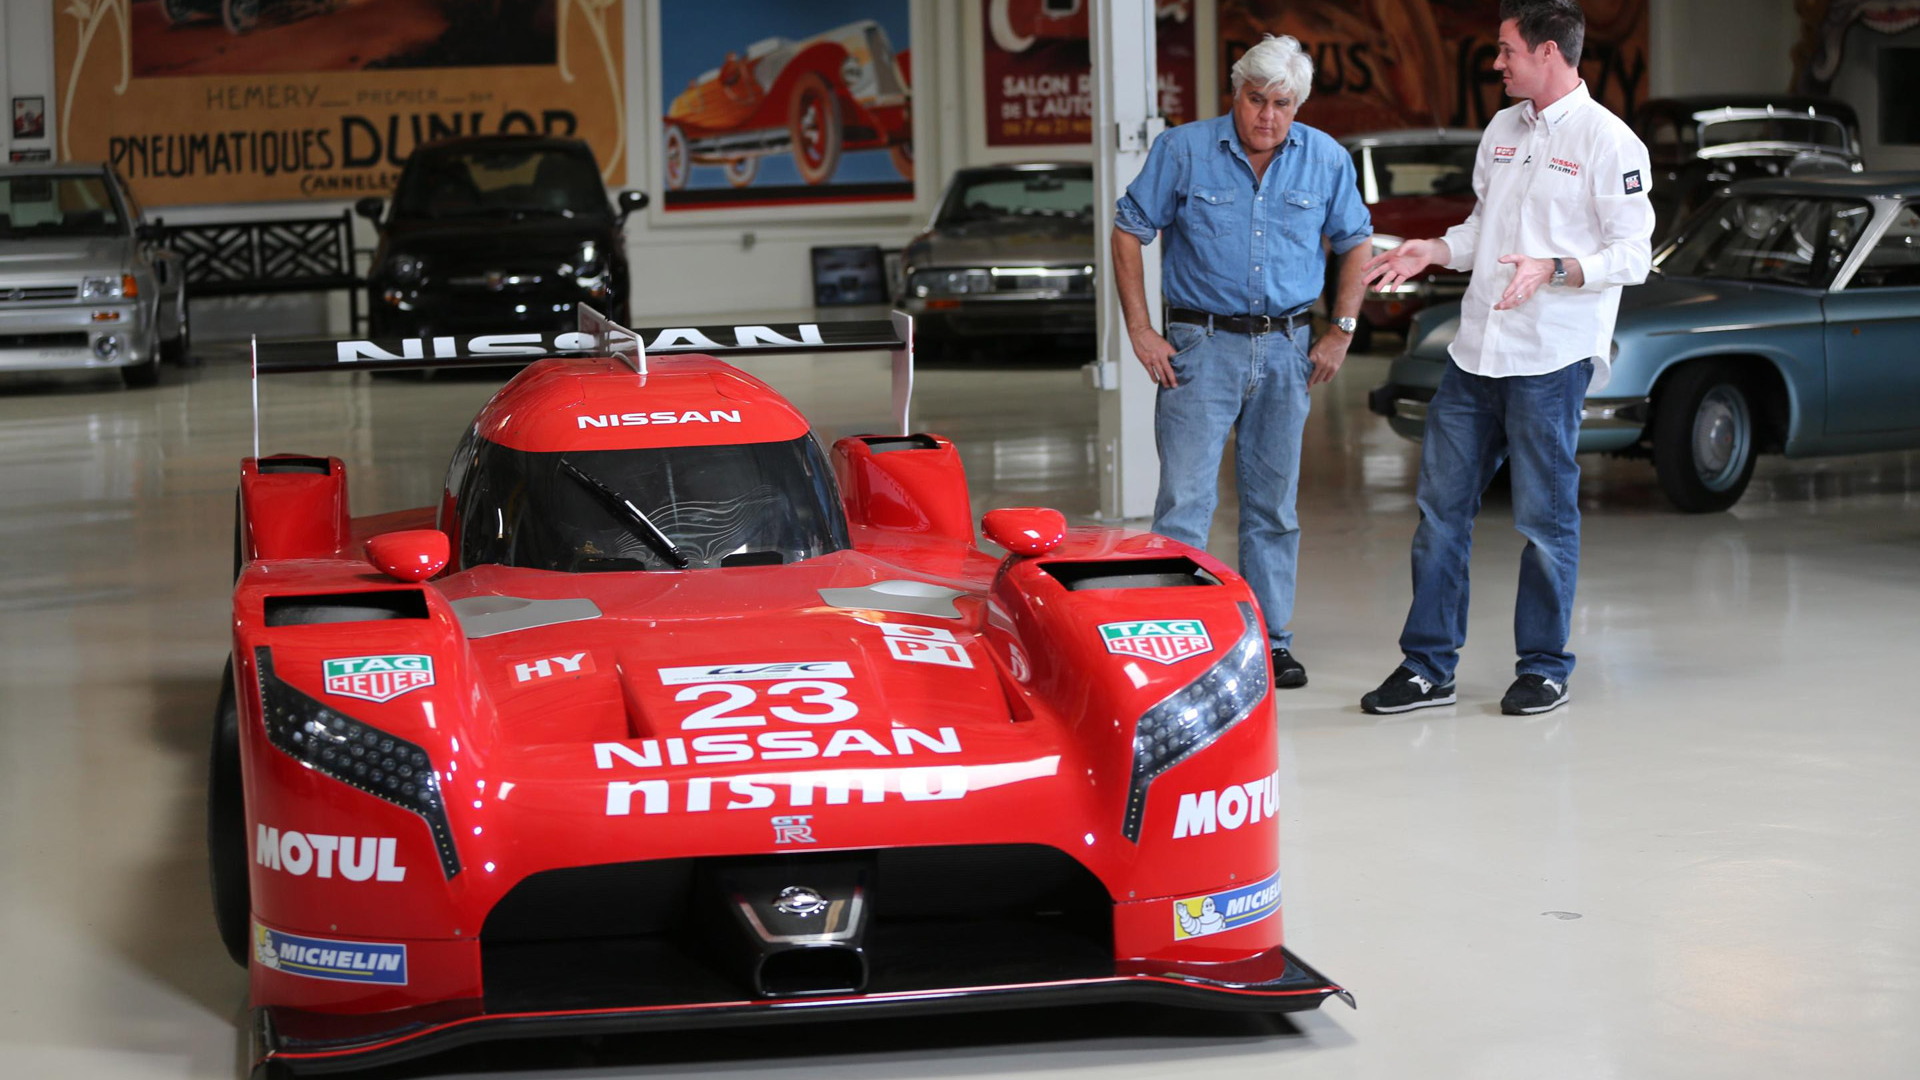 2015 Nissan GT-R LM NISMO at Jay Leno’s Garage